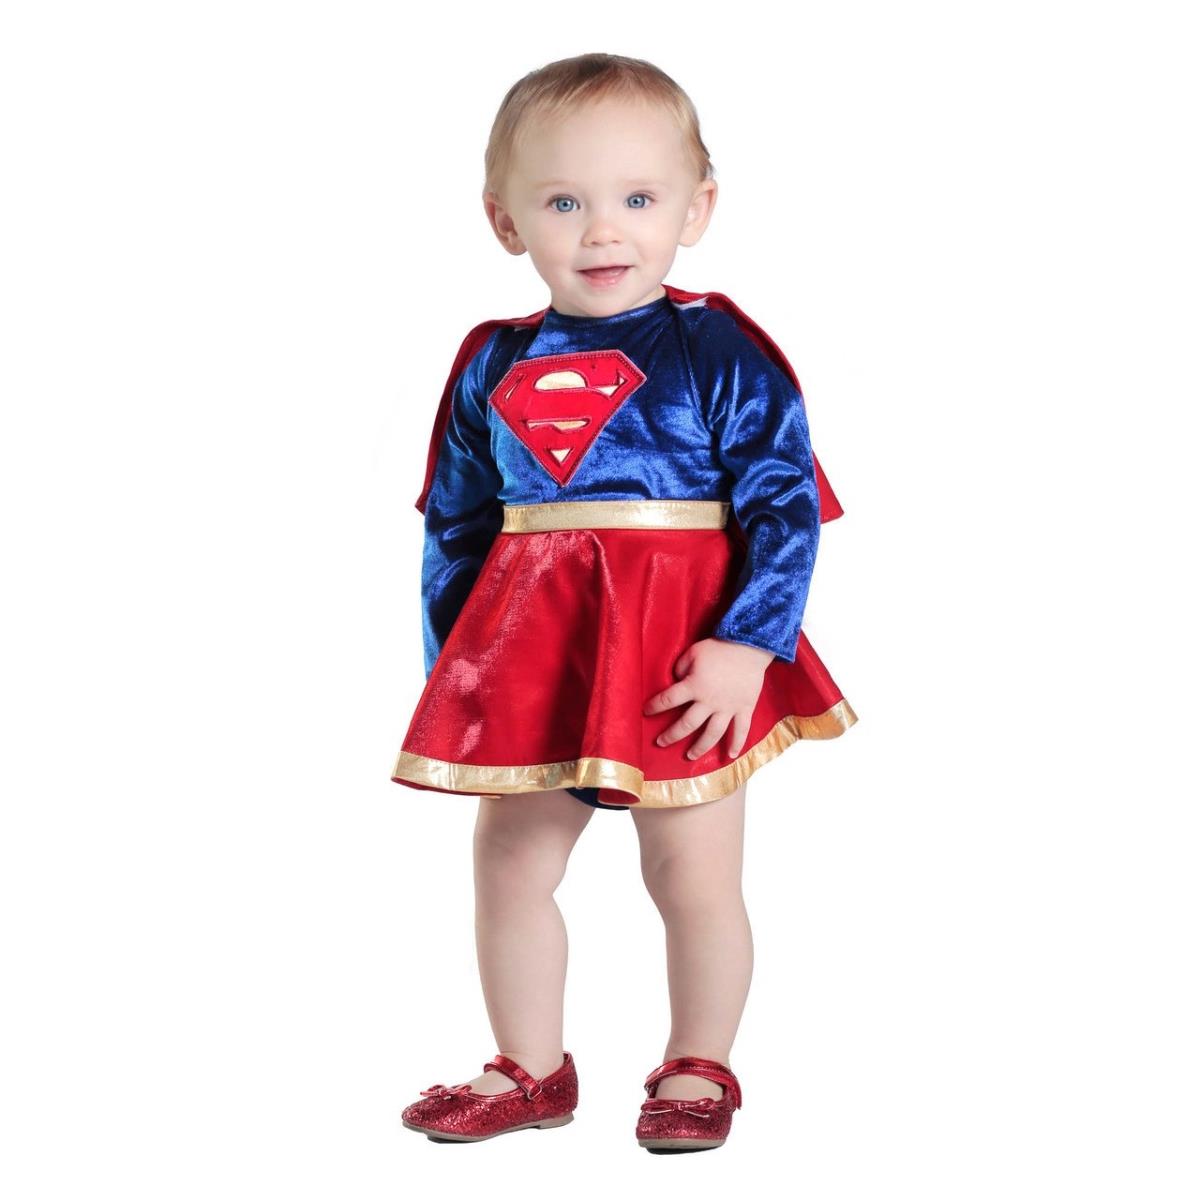 280469 Baby Supergirl Dress & Diaper Cover Set Costume, 12-18 Months